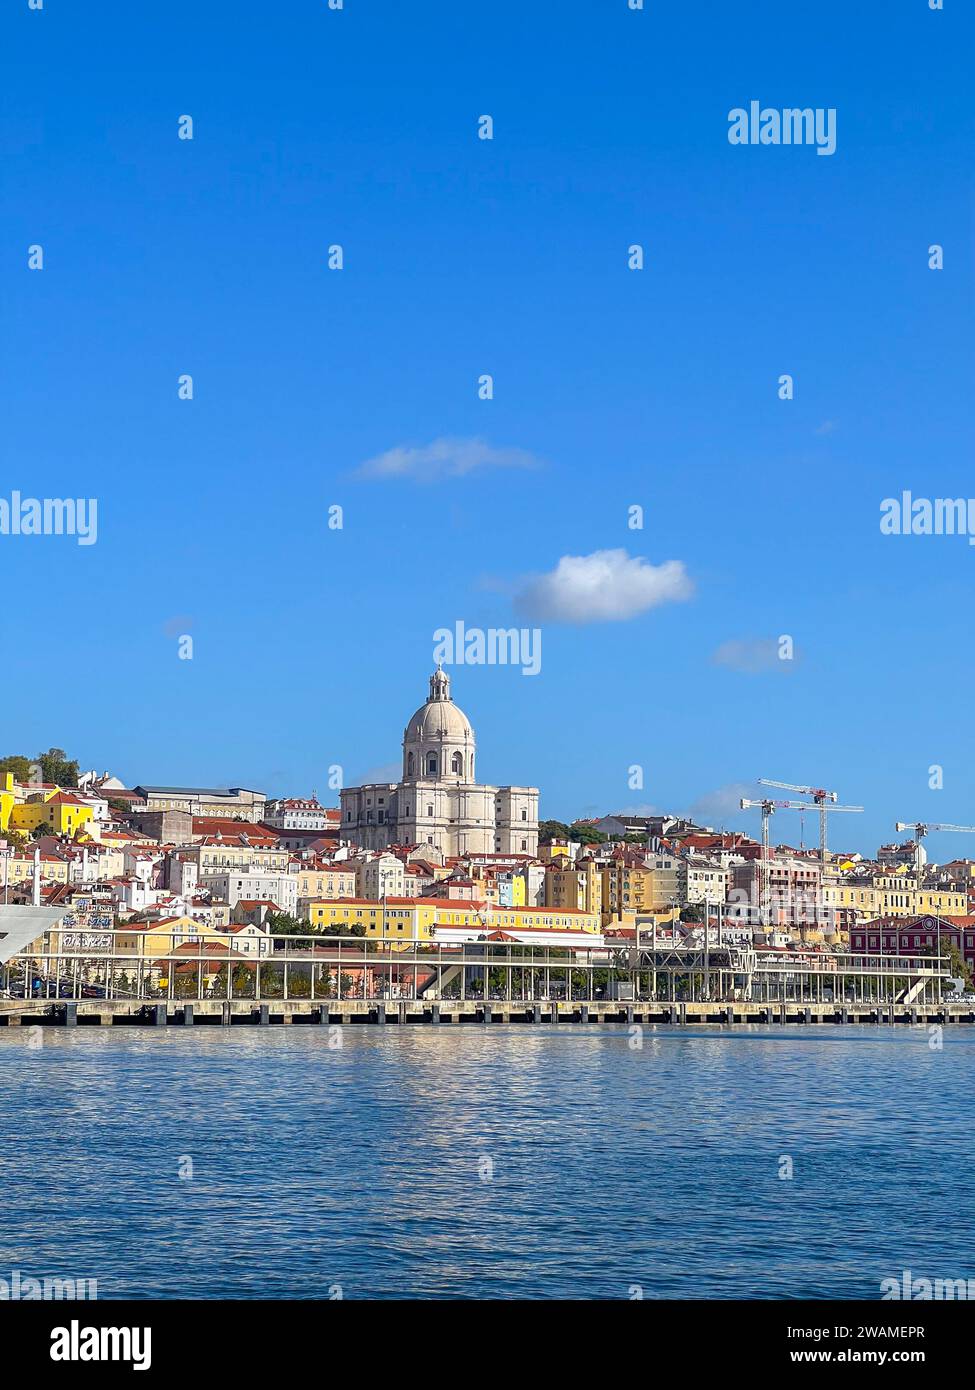 Lisbon riverfront seen from Tagus River Stock Photo